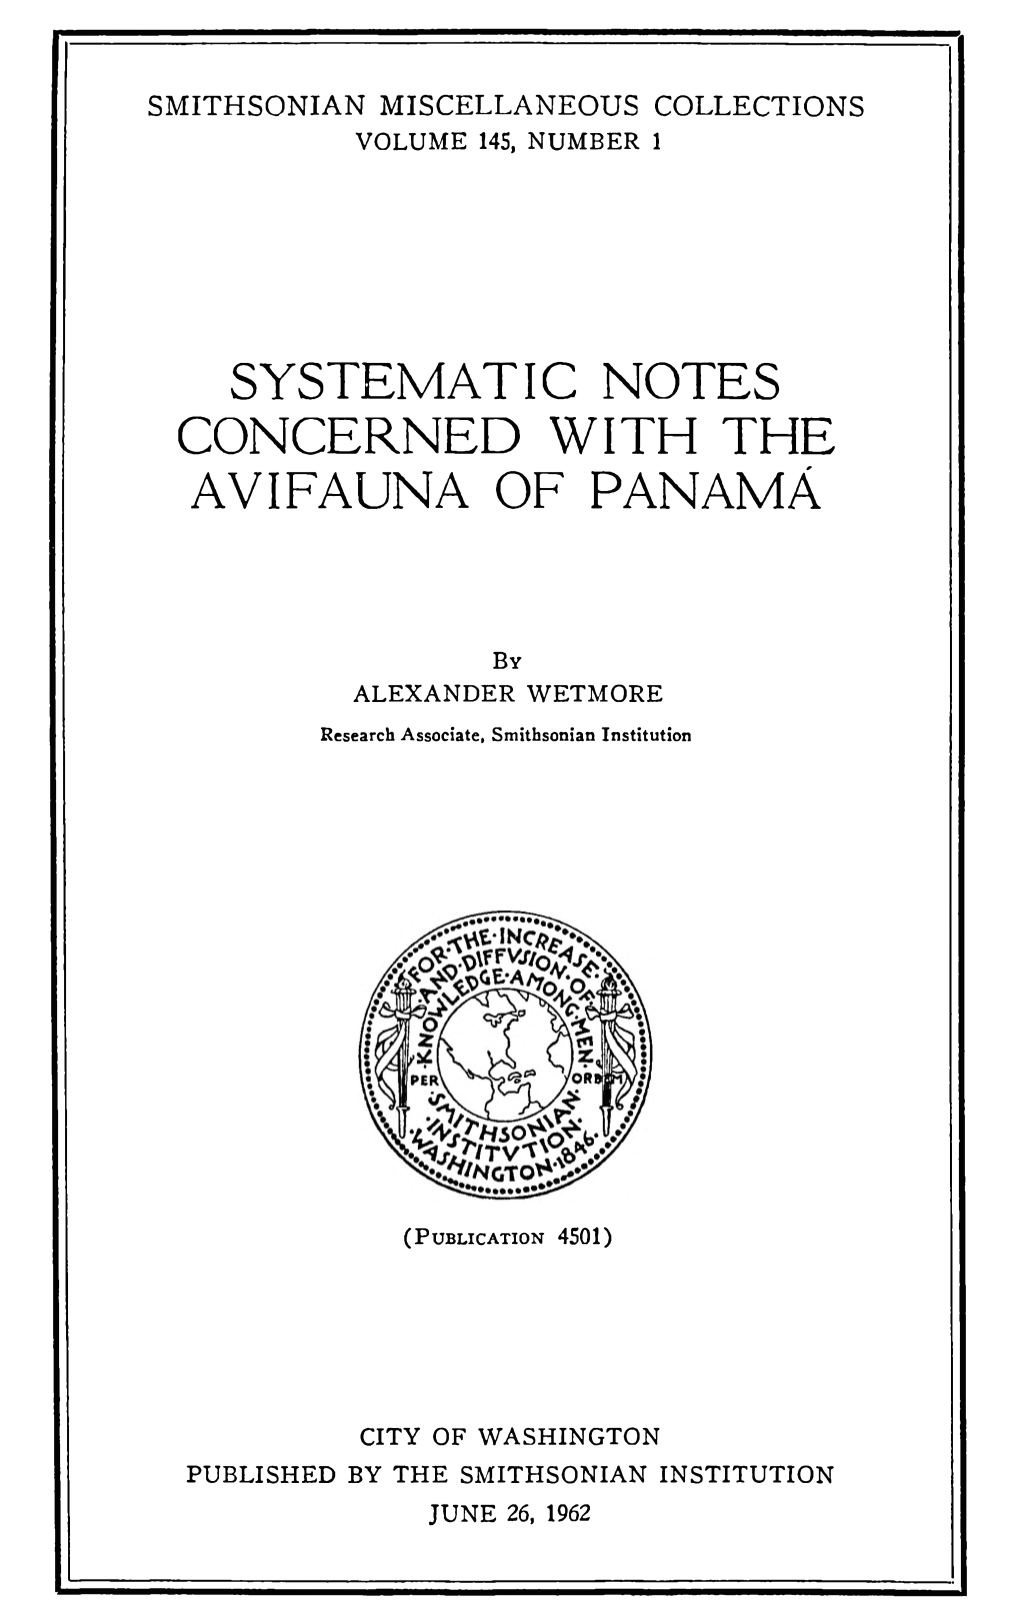 Systematic Notes Concerned with the Avifauna of Panamá